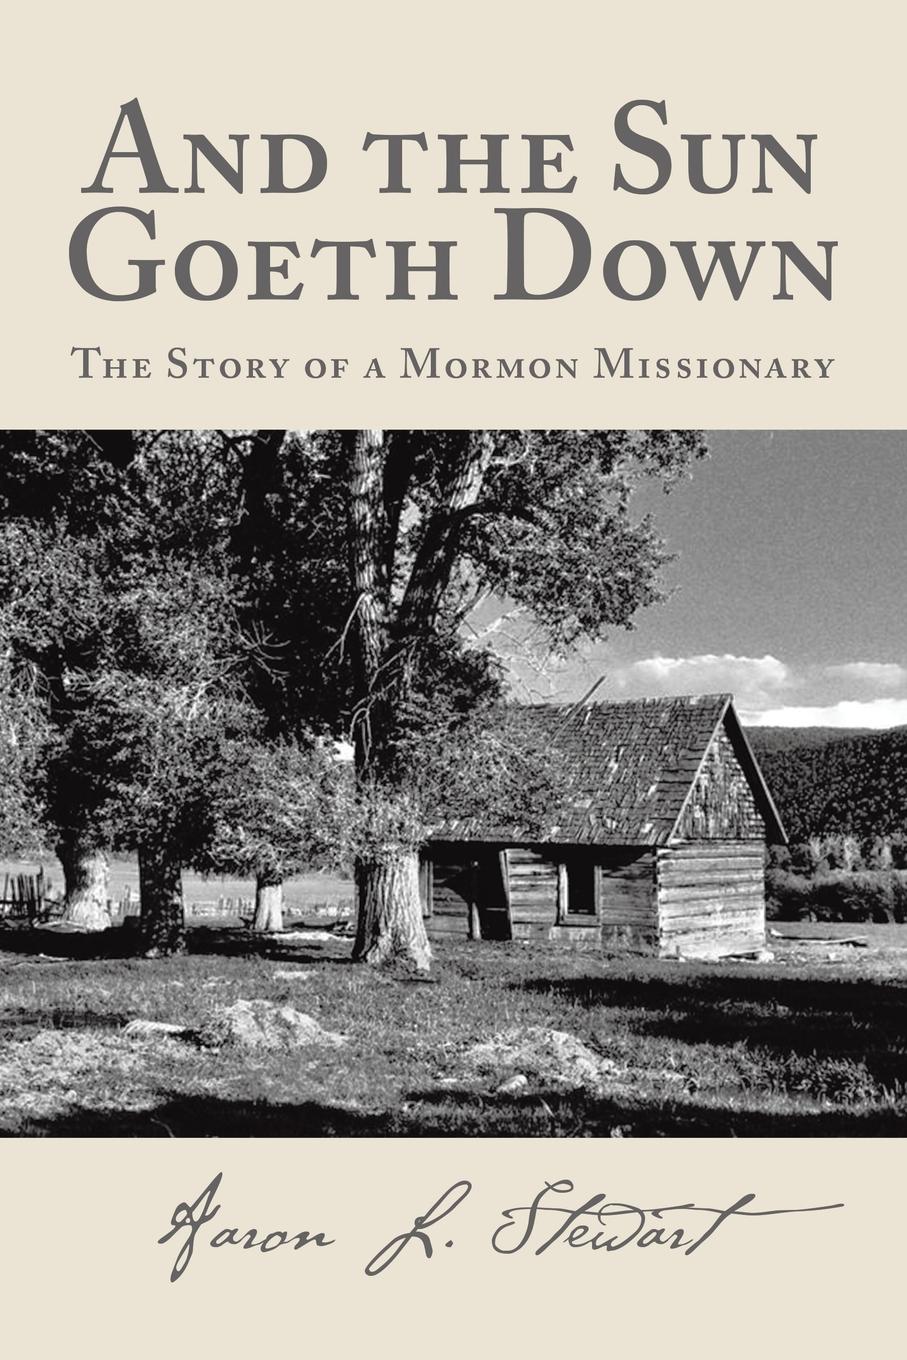 And the Sun Goeth Down. The Story of a Mormon Missionary